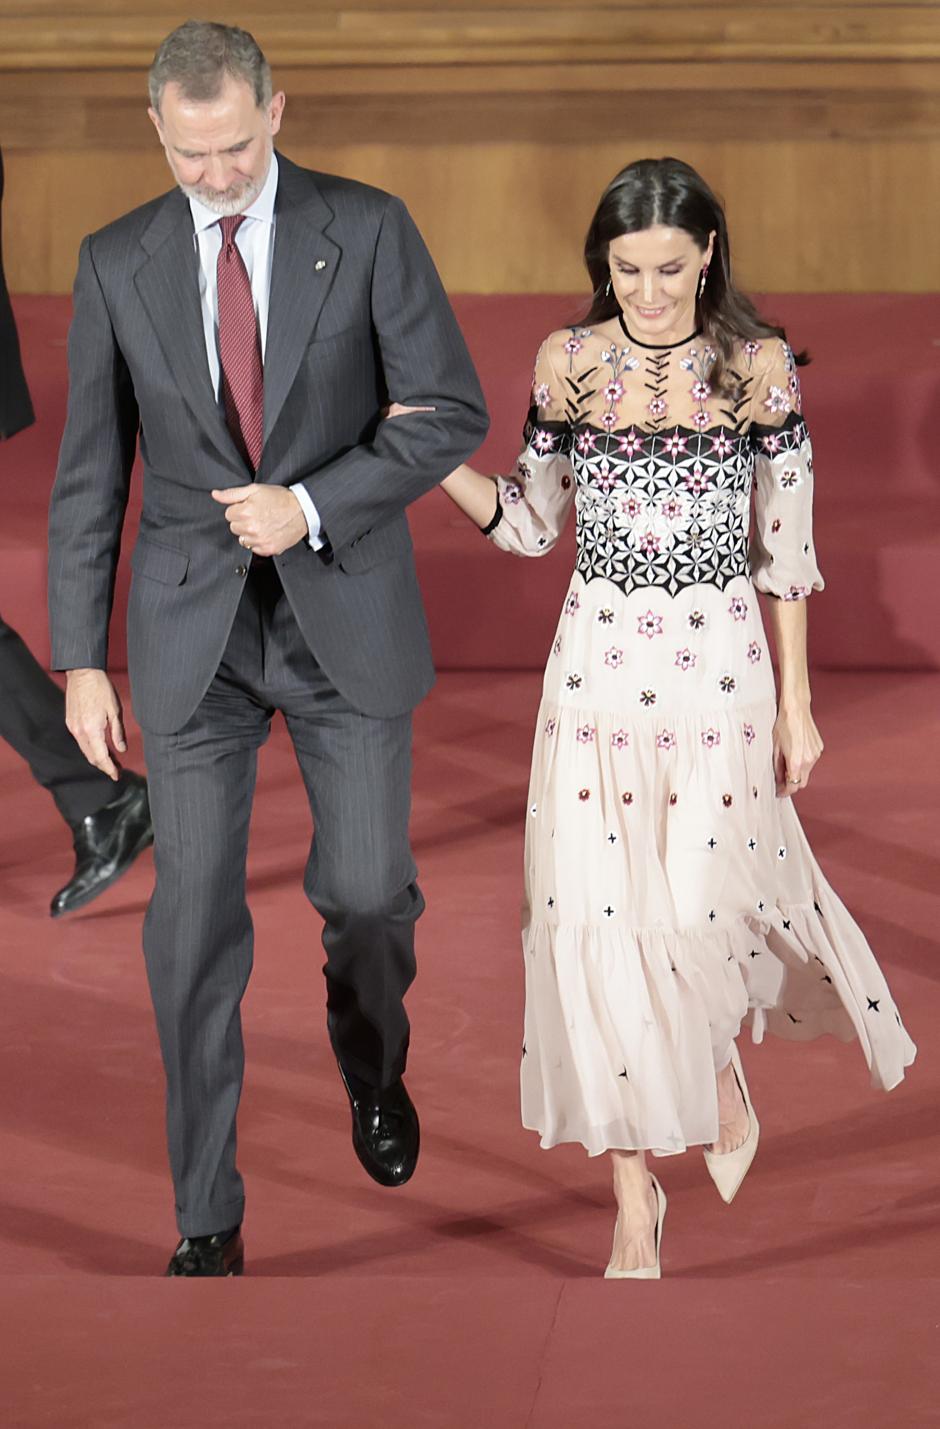 King Felipe VI and Queen Letizia during the  National Culture Awards 2021 in Zaragoza on February 2023